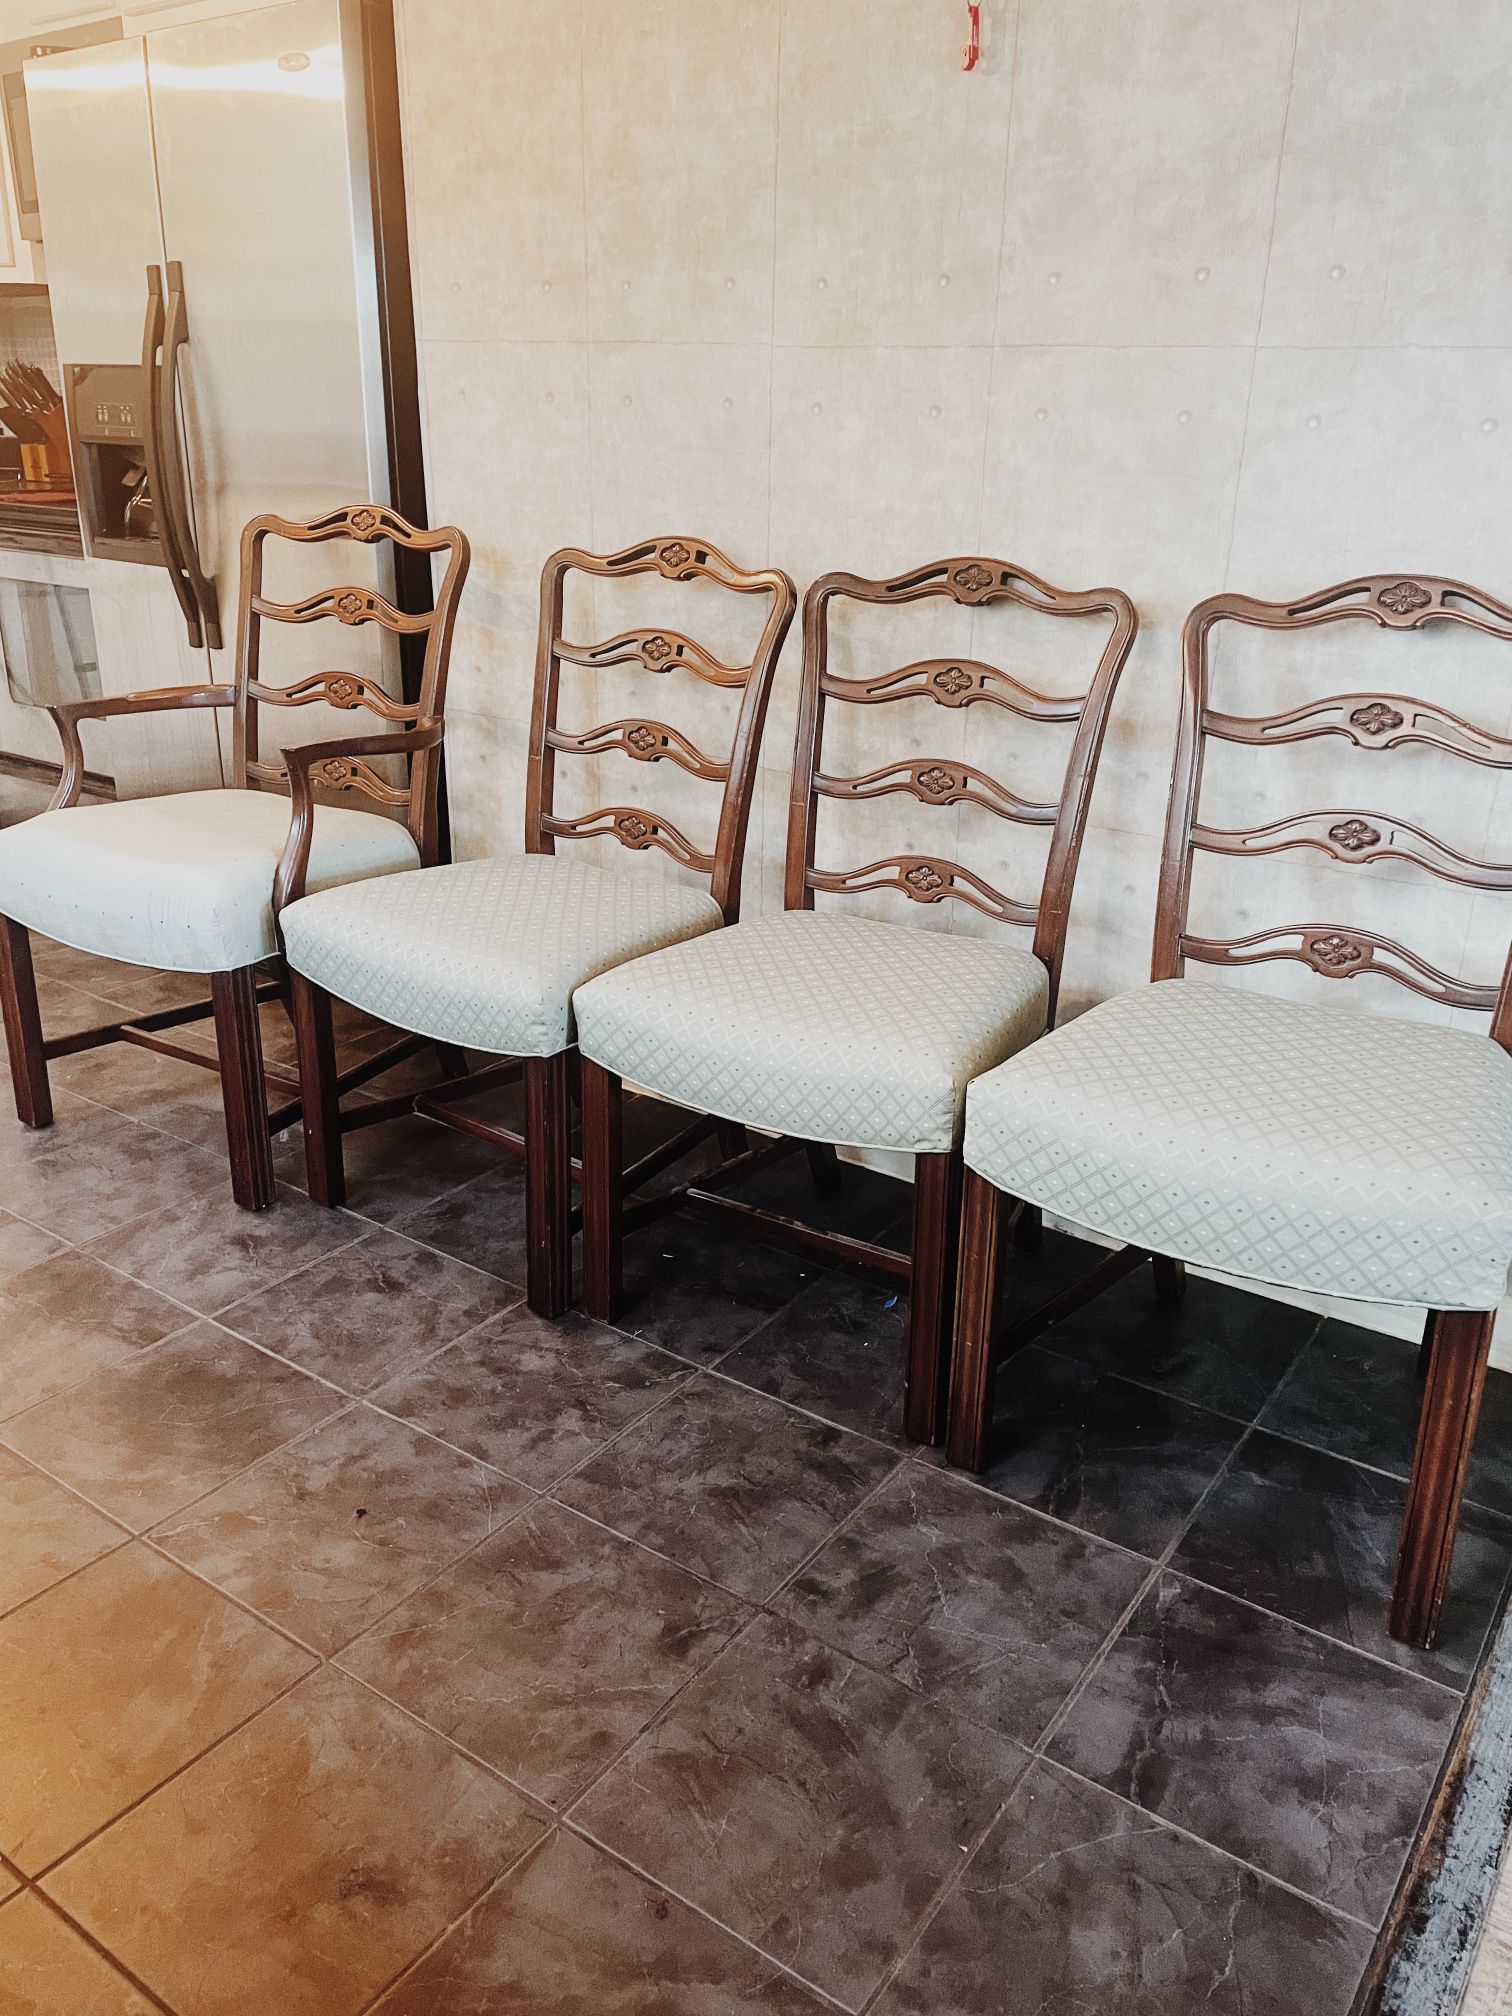 FREE DELIVERY! Set Of 4 Antique Wooden Chairs 